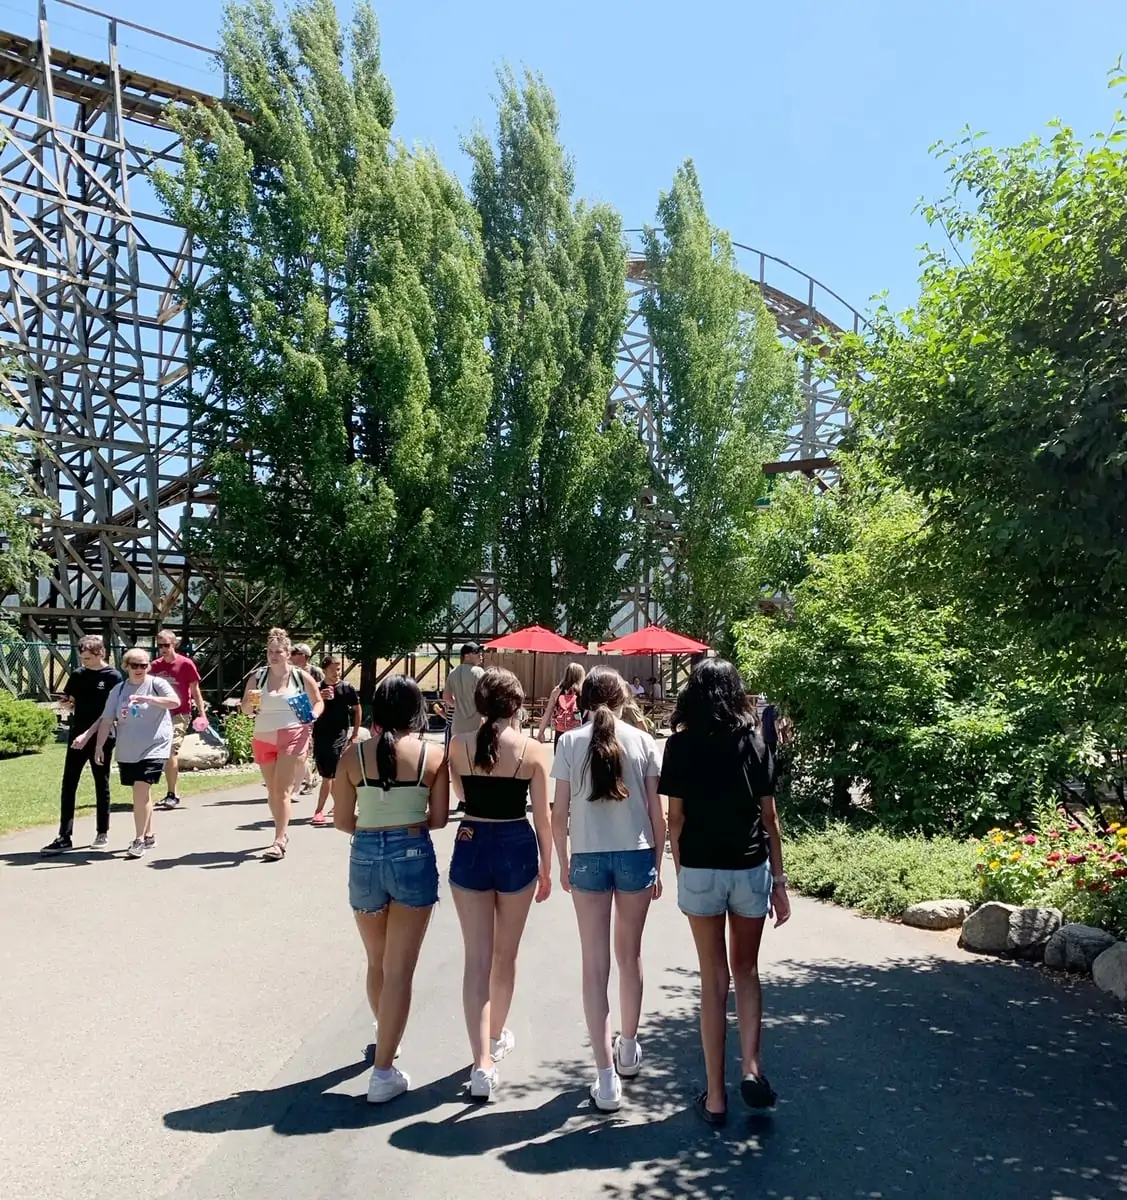 Silverwood with Toddlers to Teens - Walking at the park